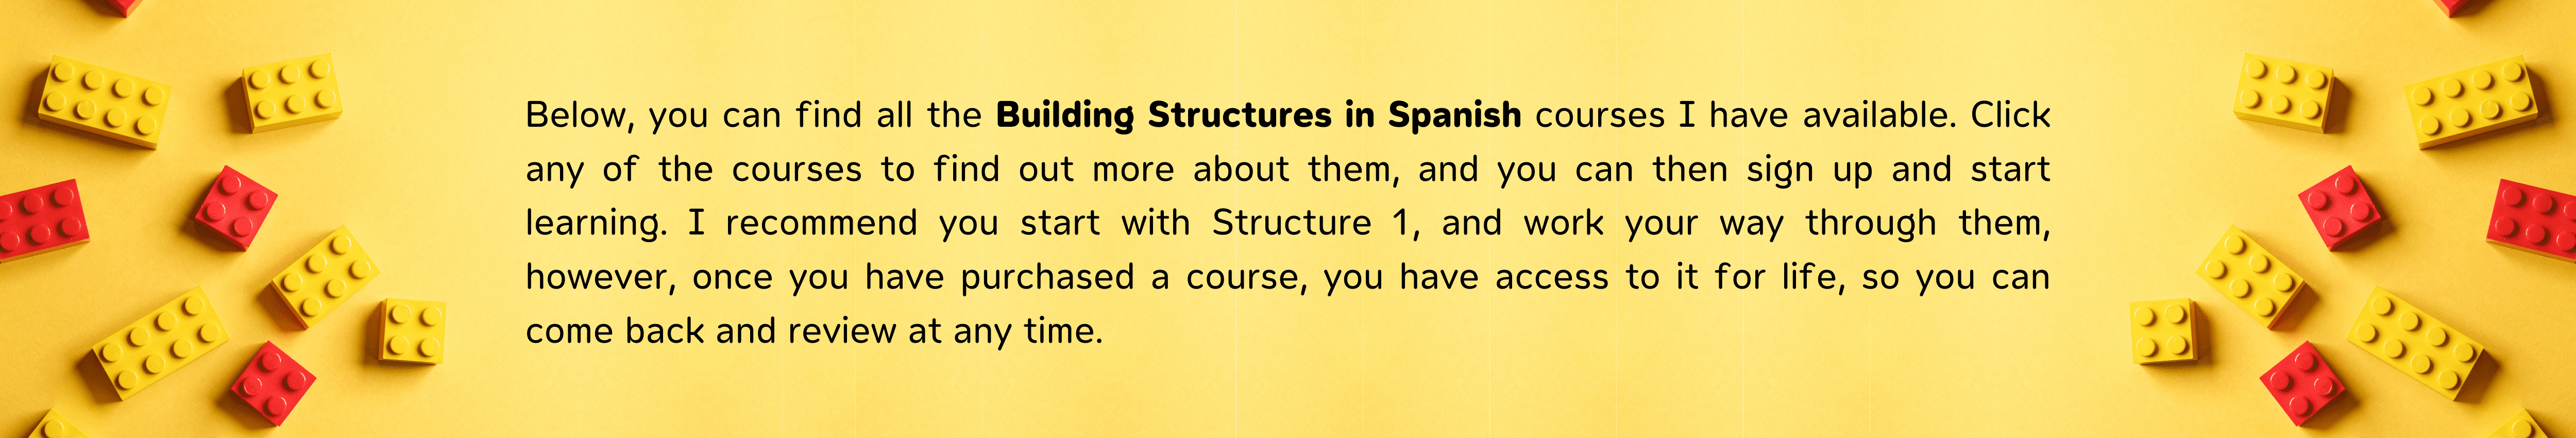 Building Structures in Spanish